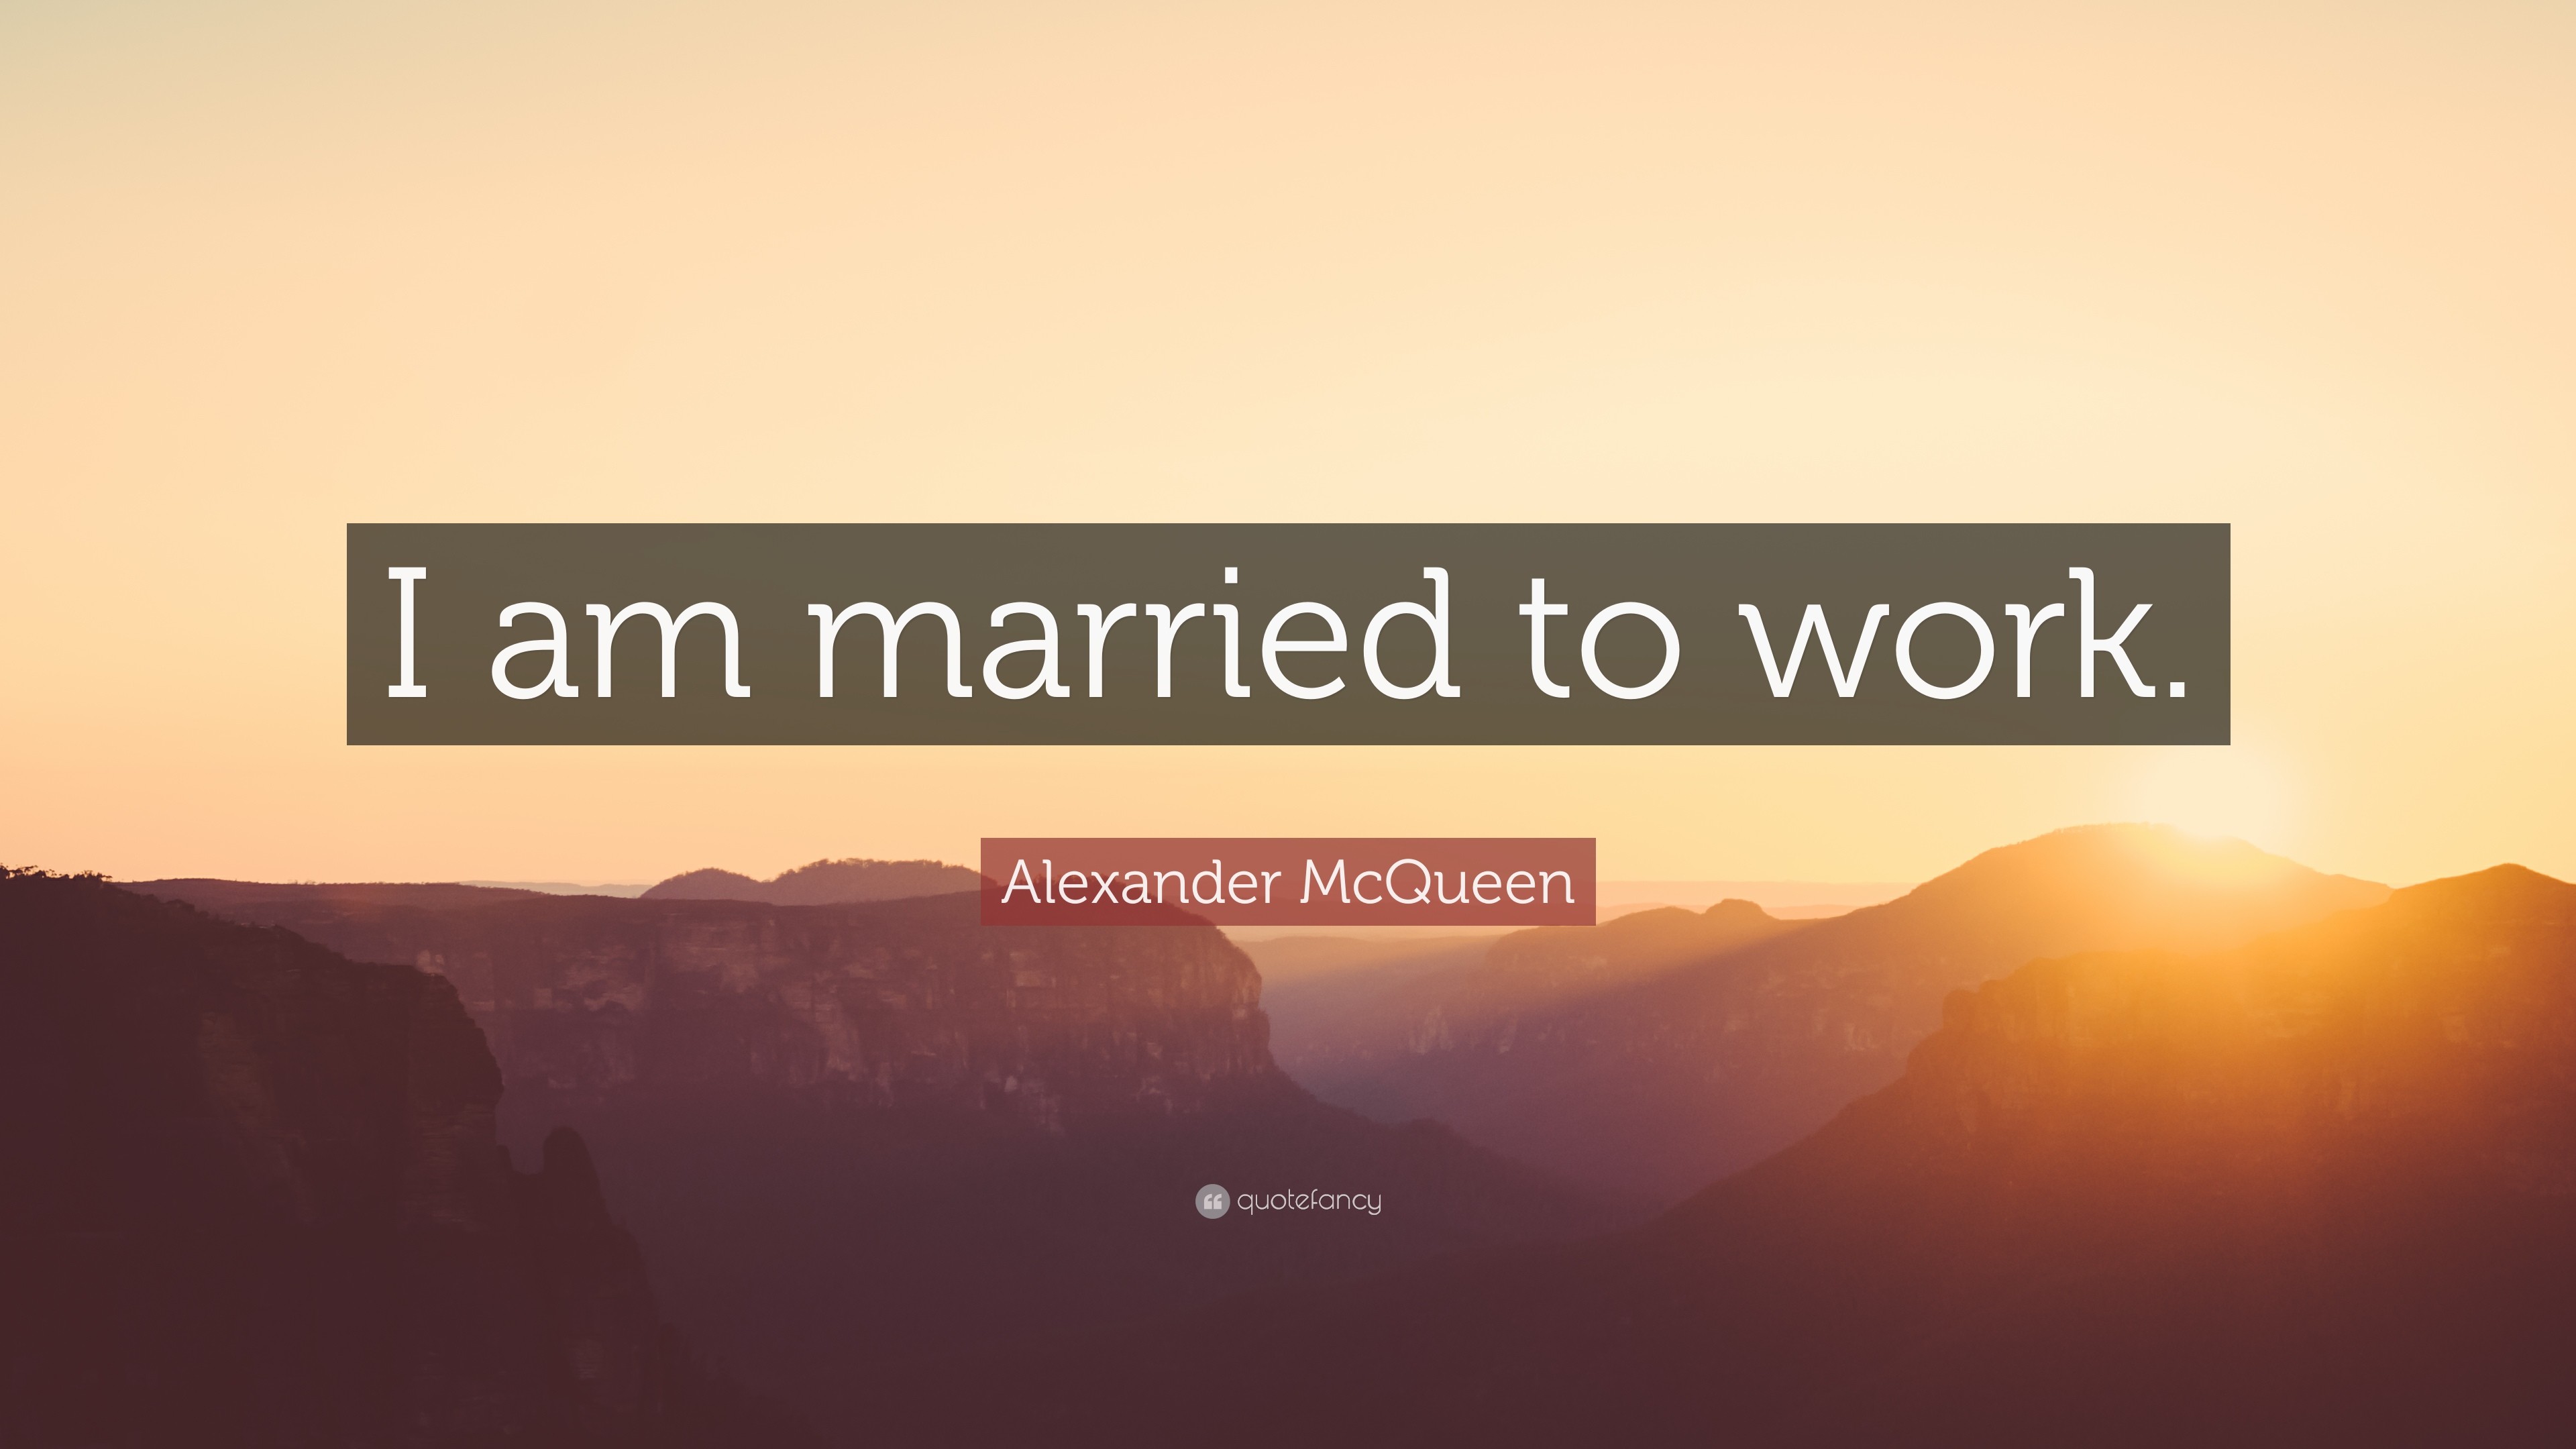 3840x2160 Alexander McQueen Quote: “I am married to work.”